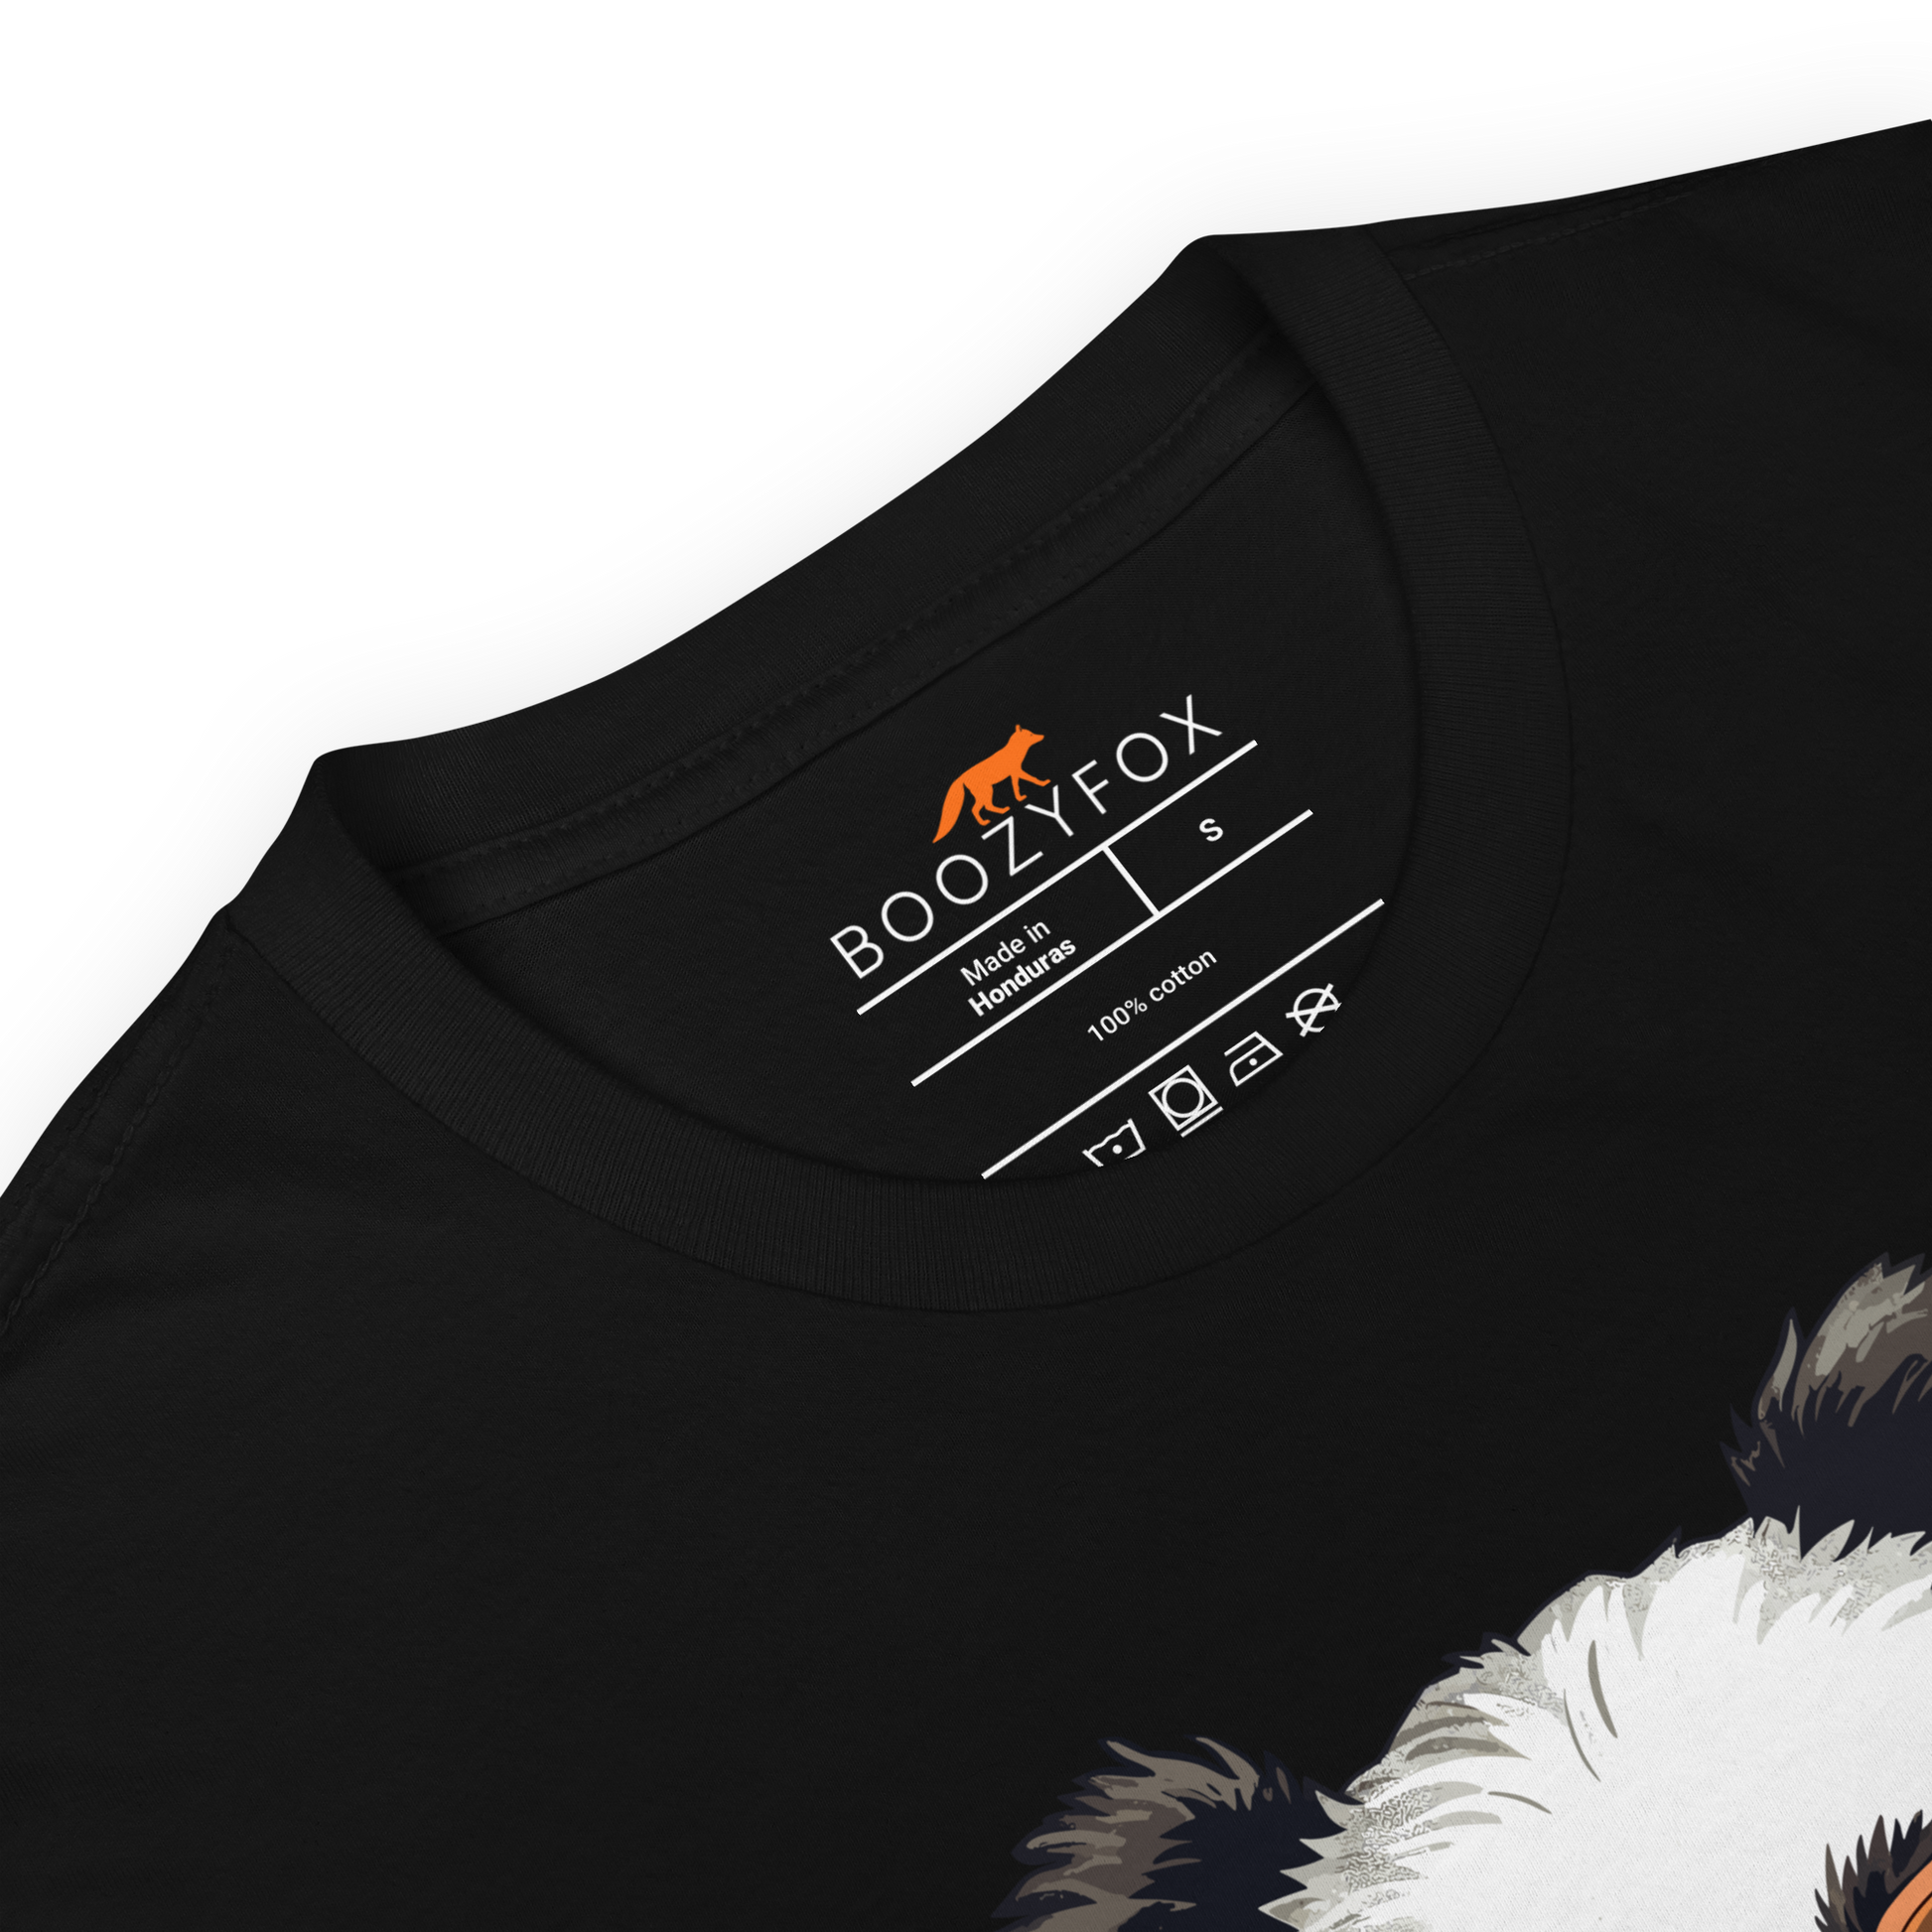 Product details of a Black Panda T-Shirt featuring an adorable Eat, Sleep, Panda, Repeat graphic on the chest - Funny Graphic Panda T-Shirts - Boozy Fox